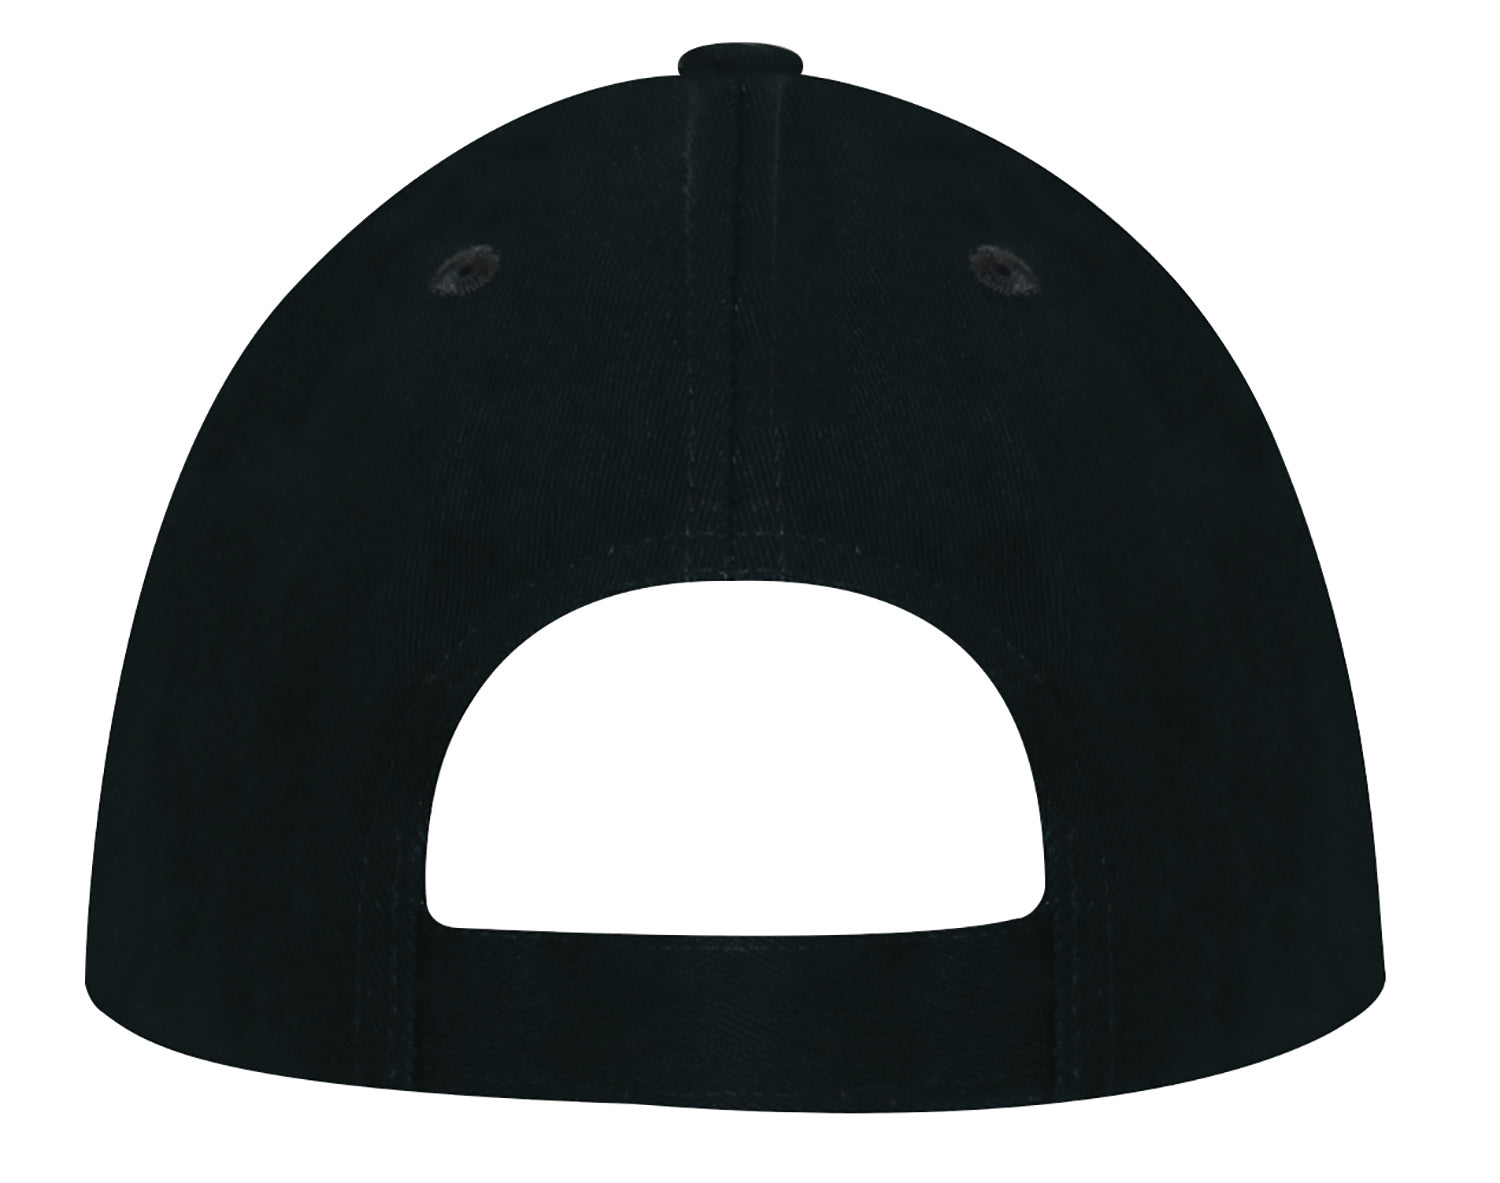 Rothco Air Force "No One Comes Close" Low Profile Cap